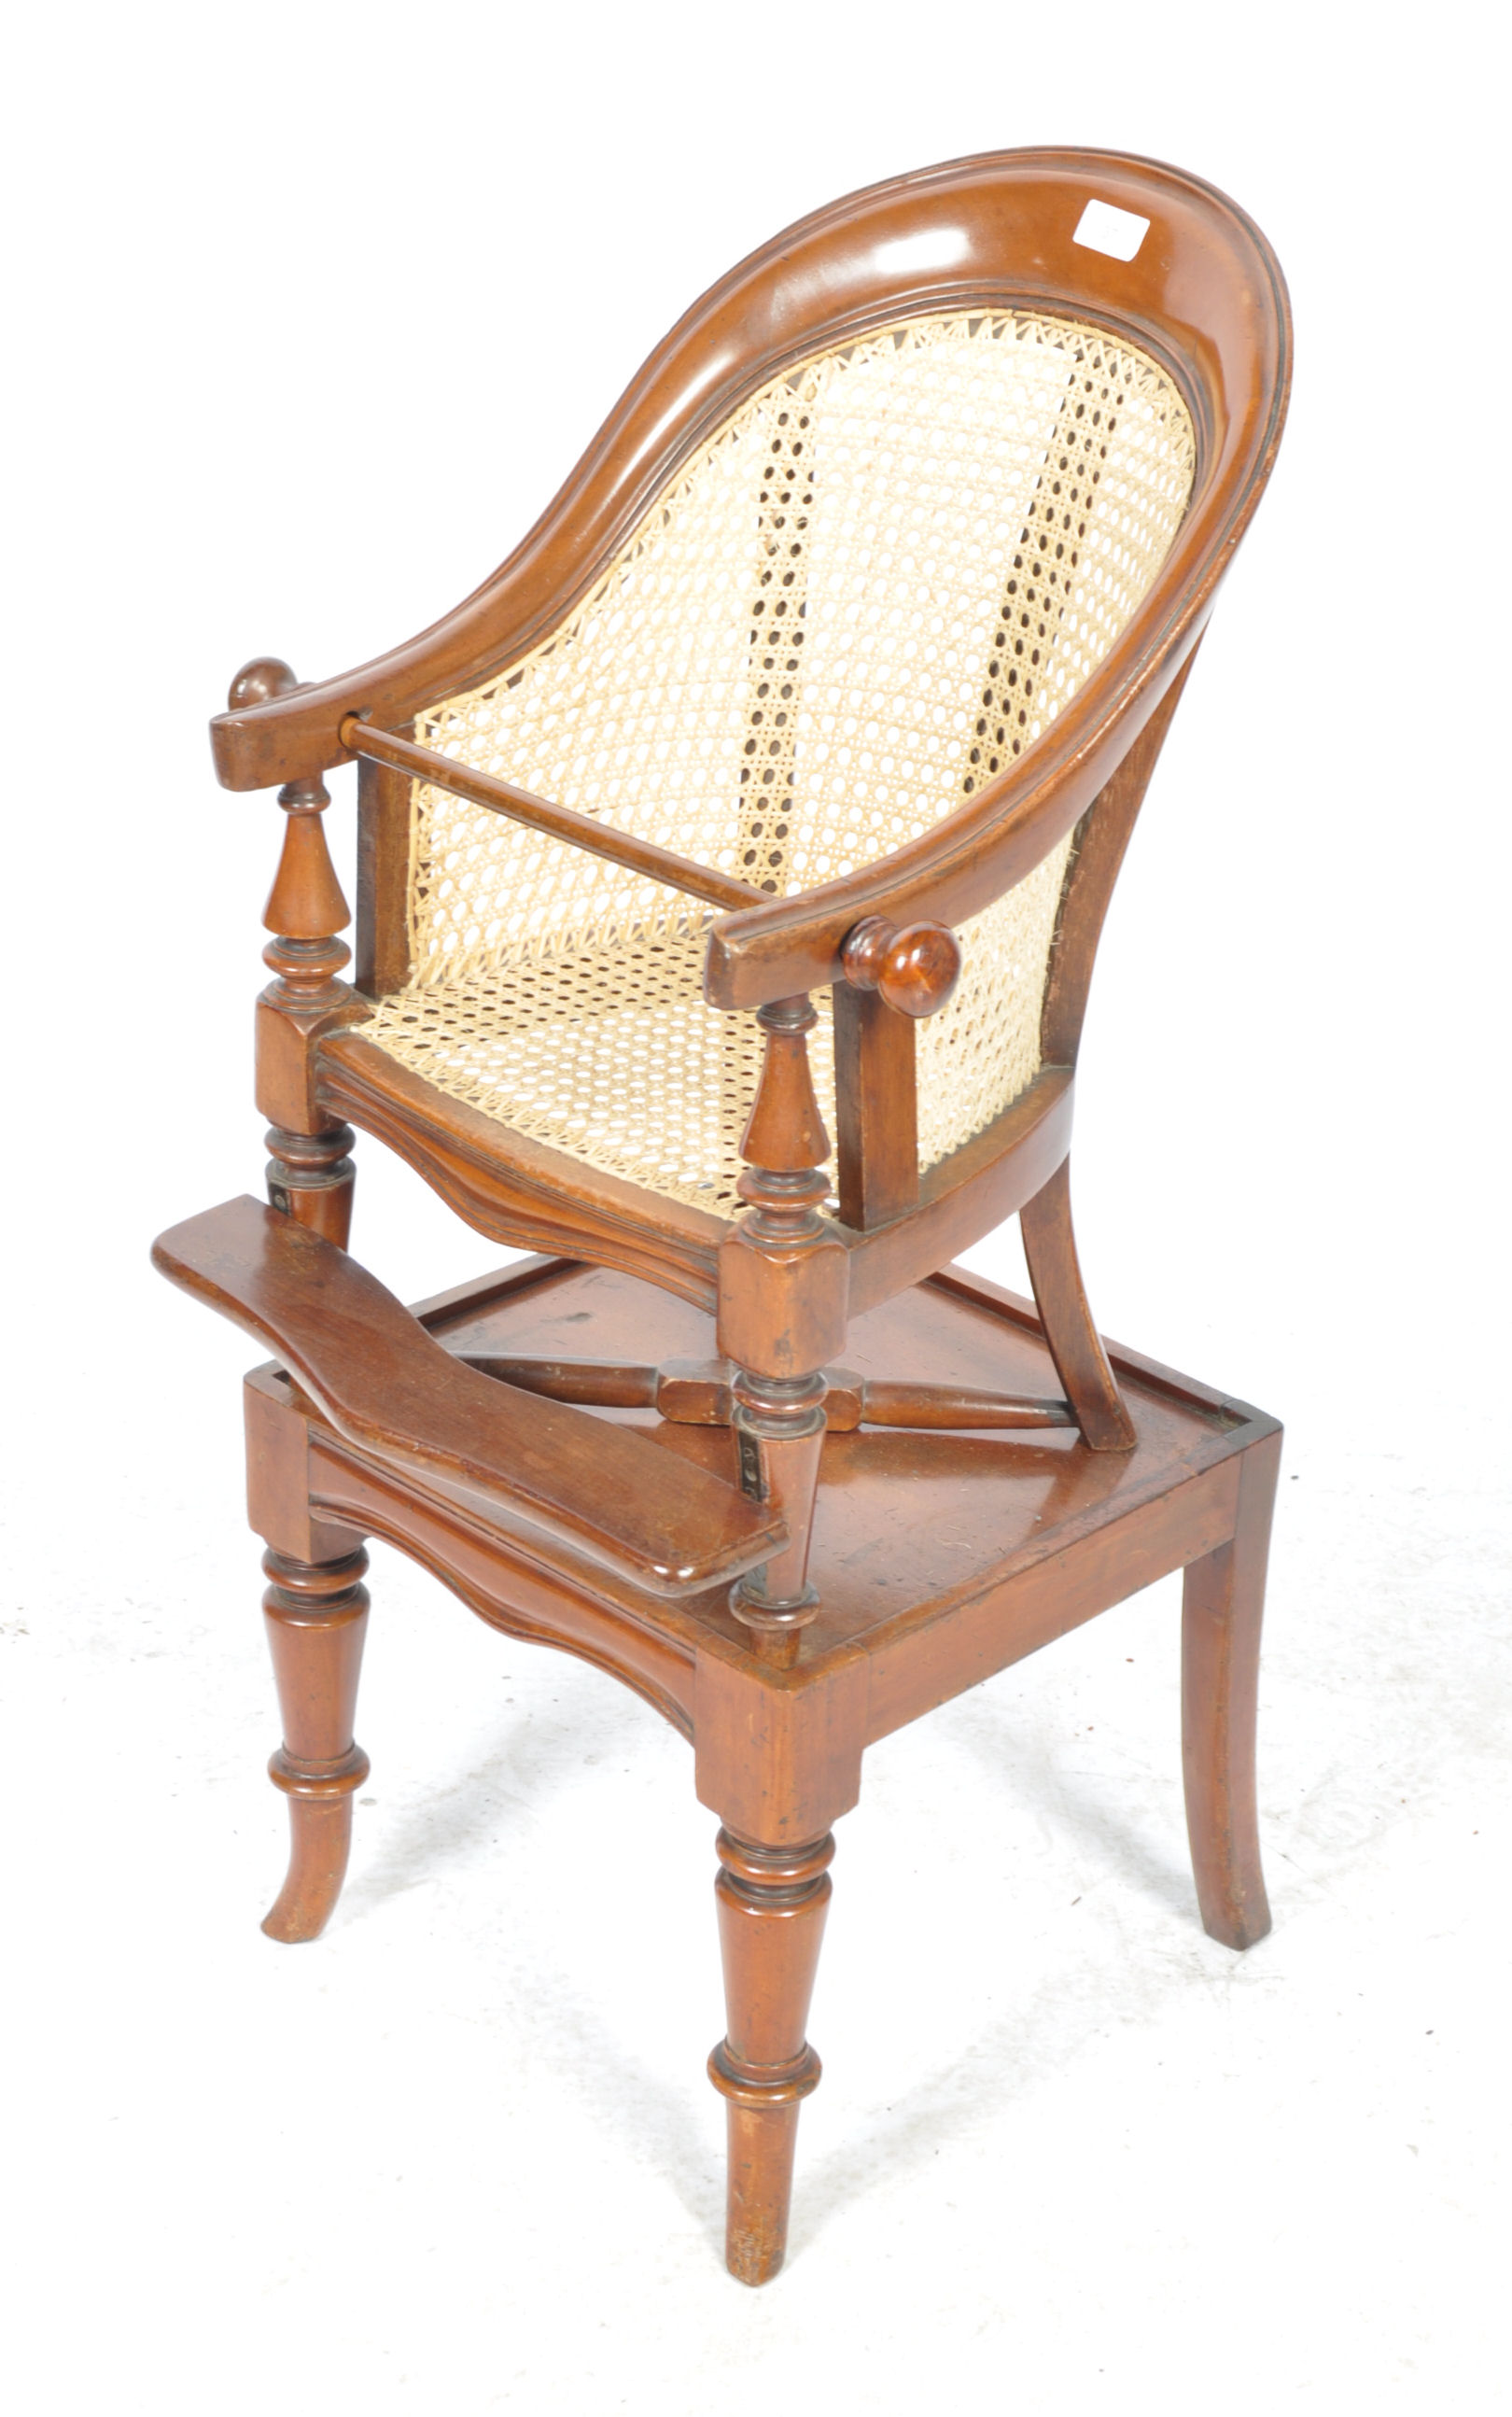 19TH CENTURY VICTORIAN ENGLISH ANTIQUE HIGH CHAIR - Image 10 of 16